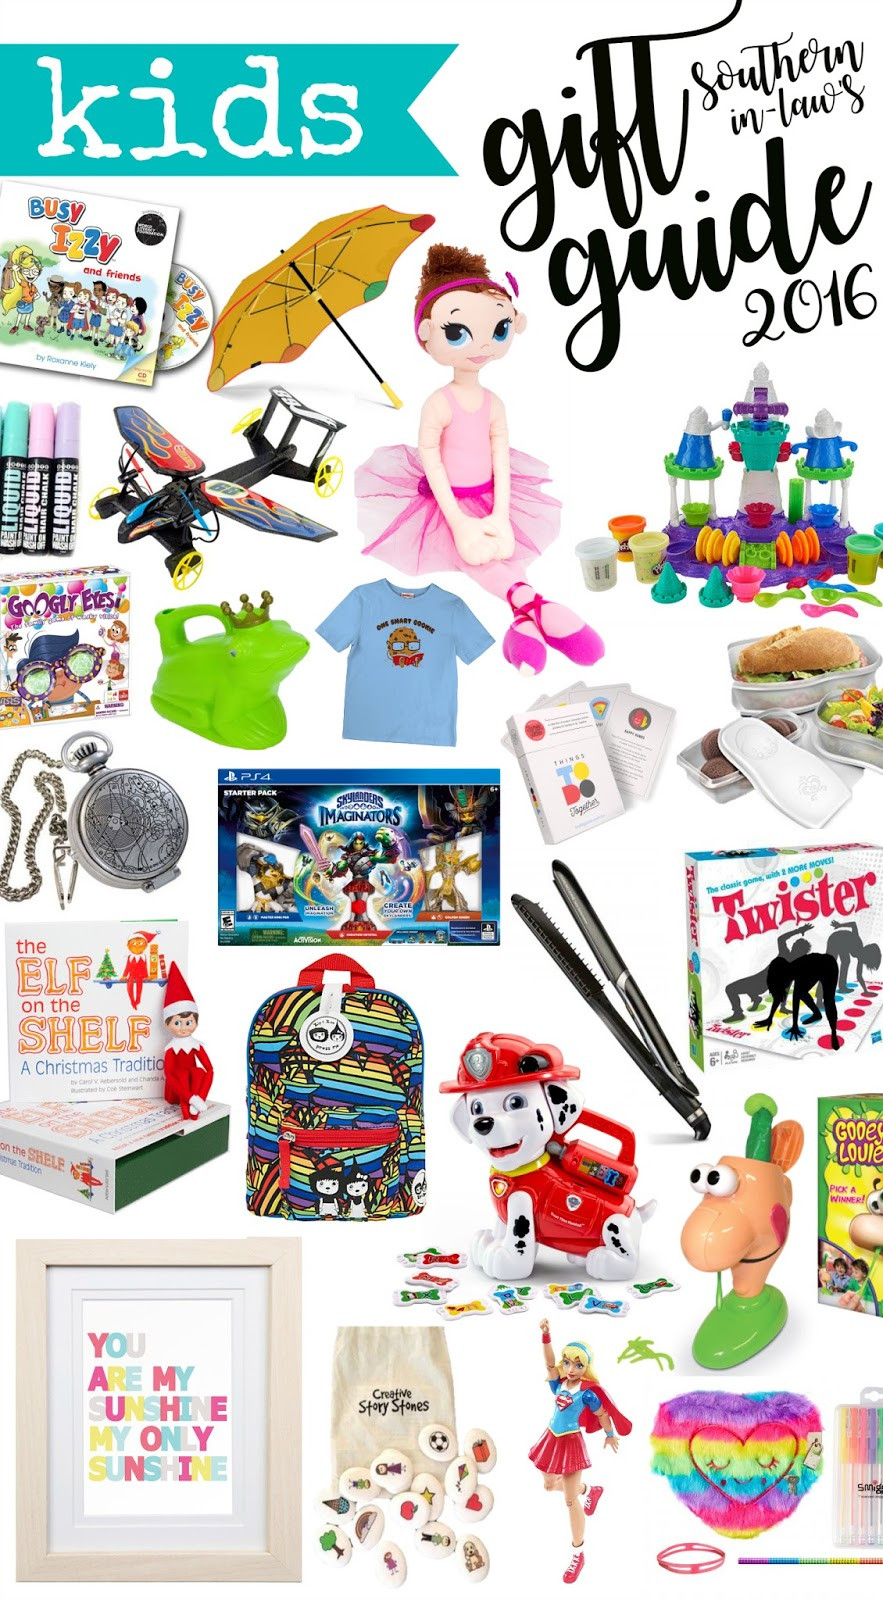 Top Gift Ideas For Kids
 Southern In Law 2016 Kids Christmas Gift Guide